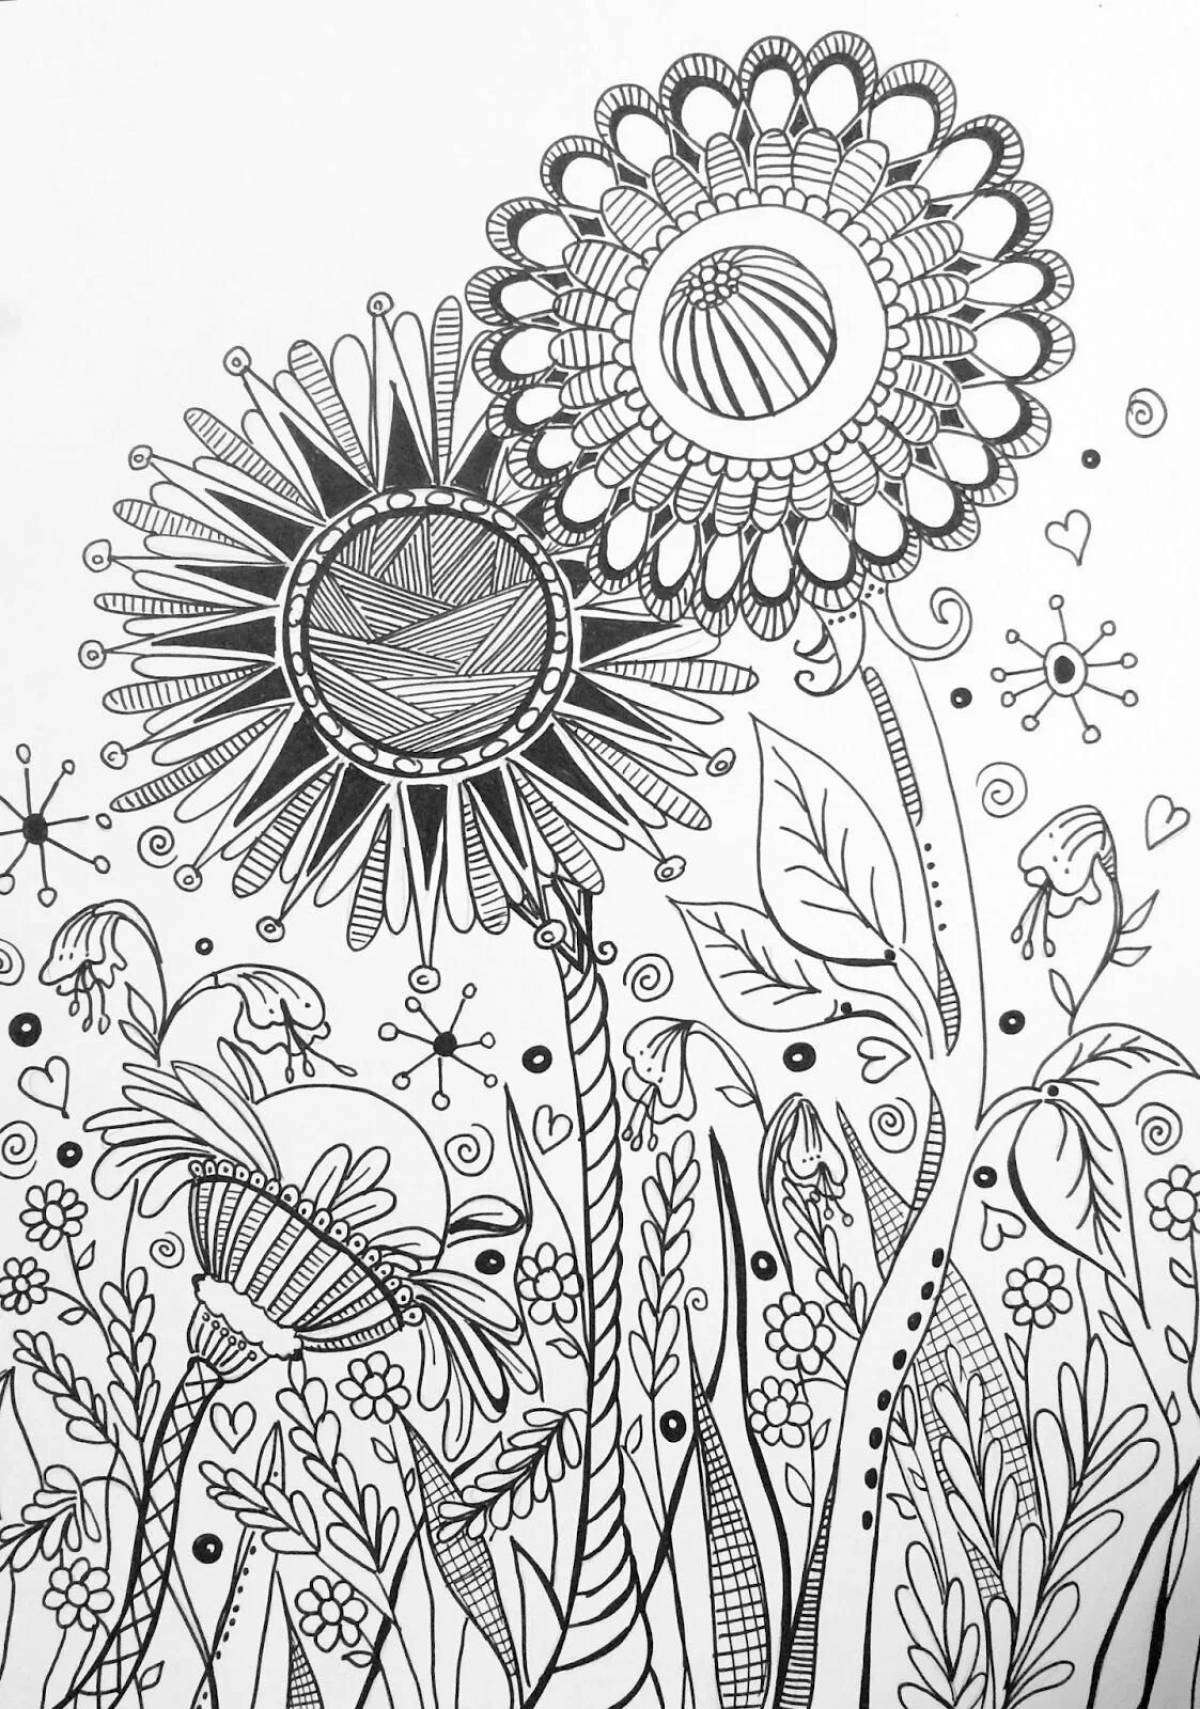 Tempting coloring book meditative for adults